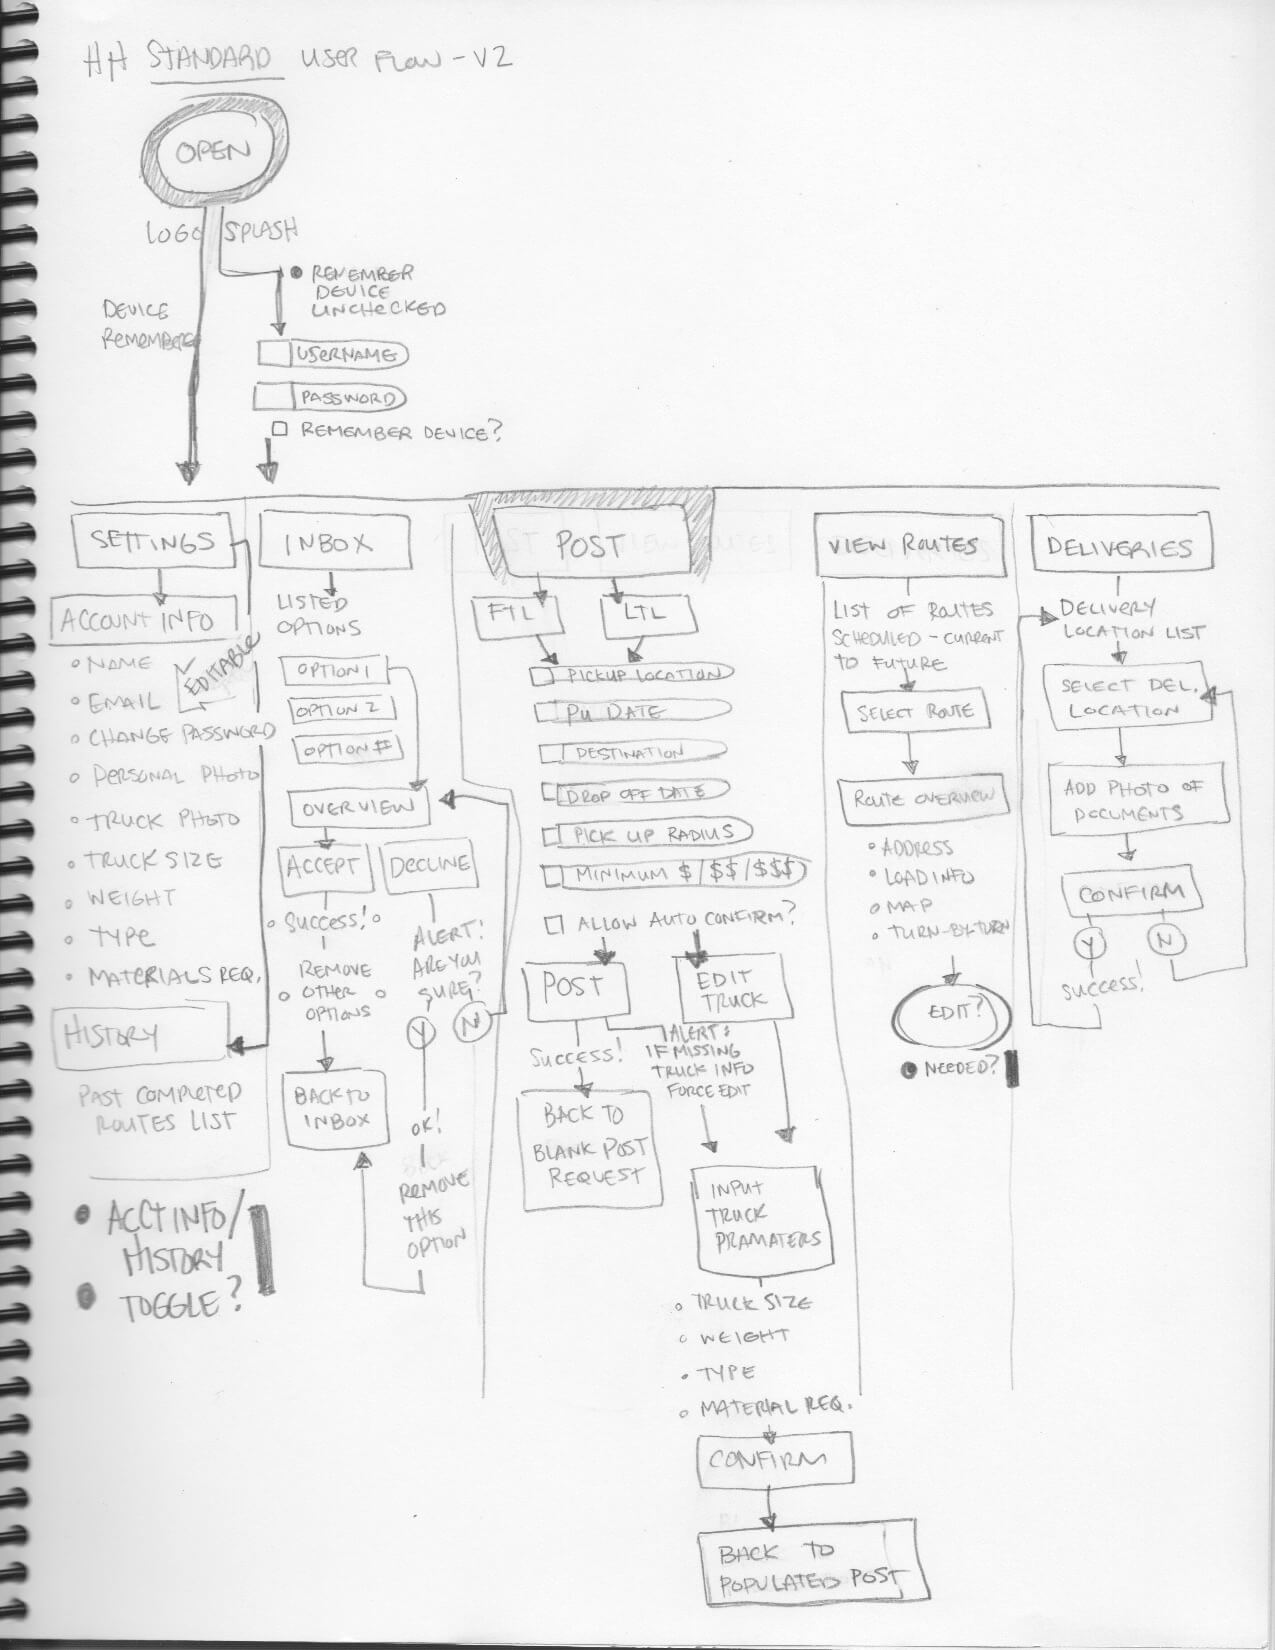 User flow example image for HaulHound